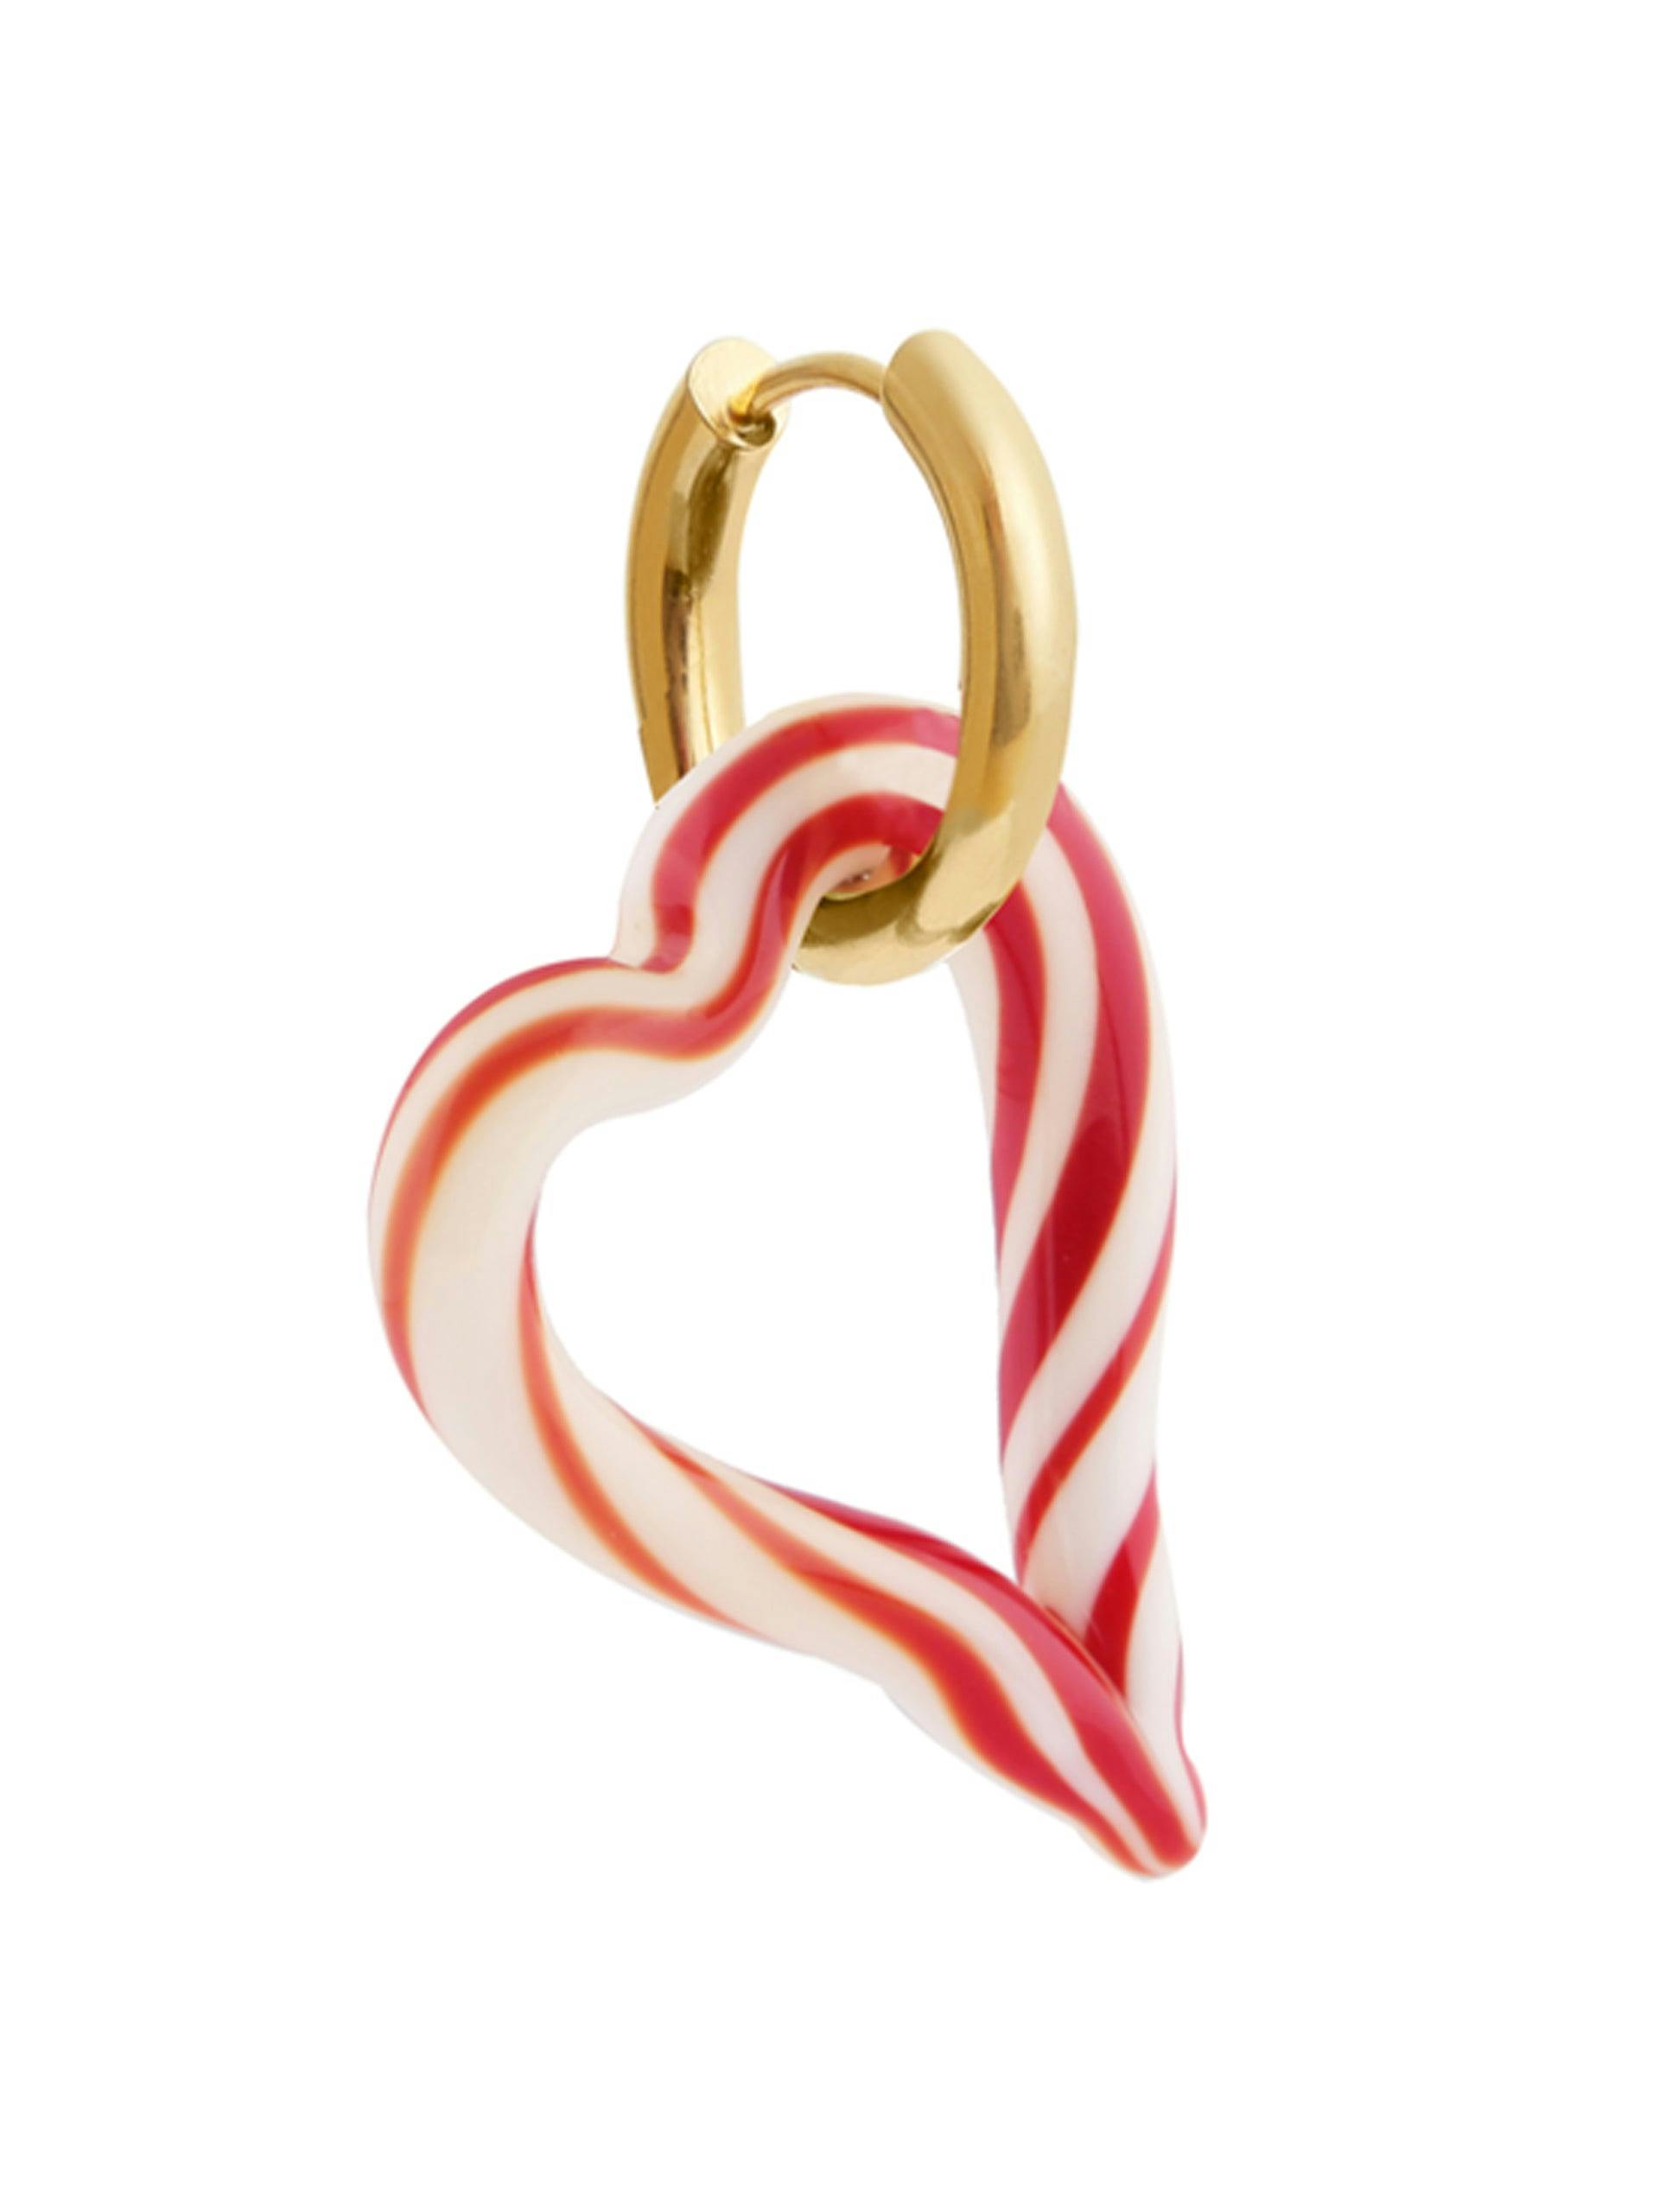 Heart of glass earring in striped ivory and red